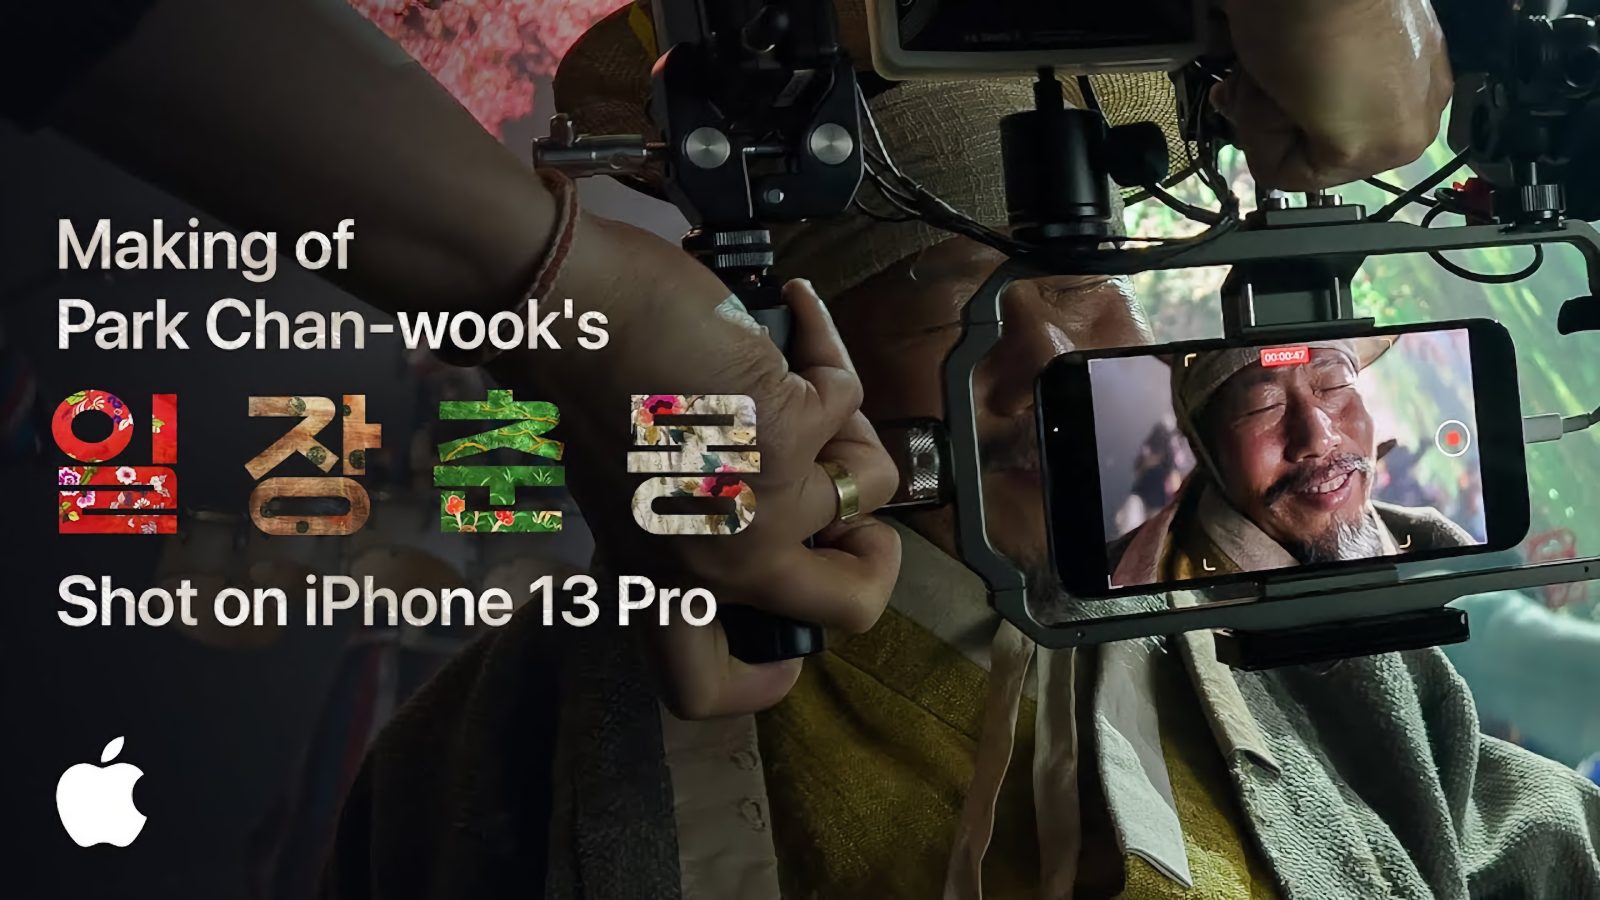 Apple's latest Shot on iPhone 13 Pro short film spotlights food culture in  Singapore [Video] - 9to5Mac